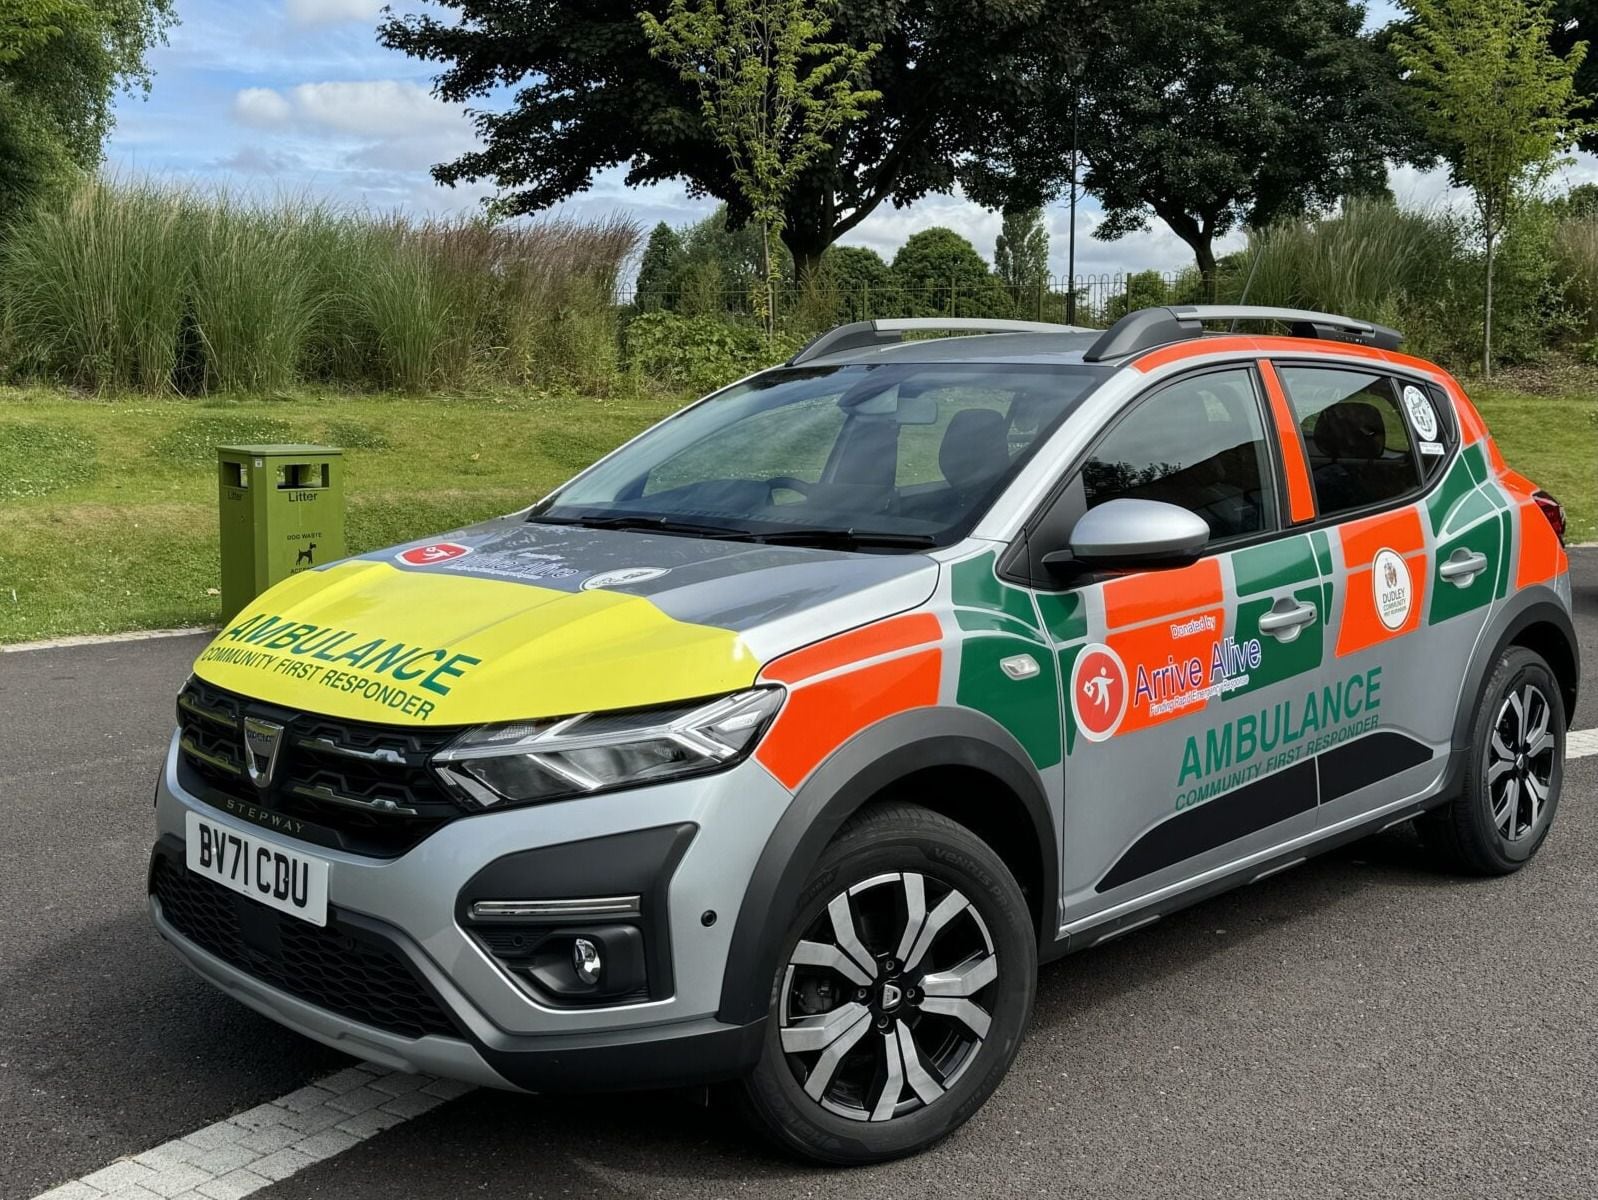 New lifesaving vehicle for Dudley Community First Responders